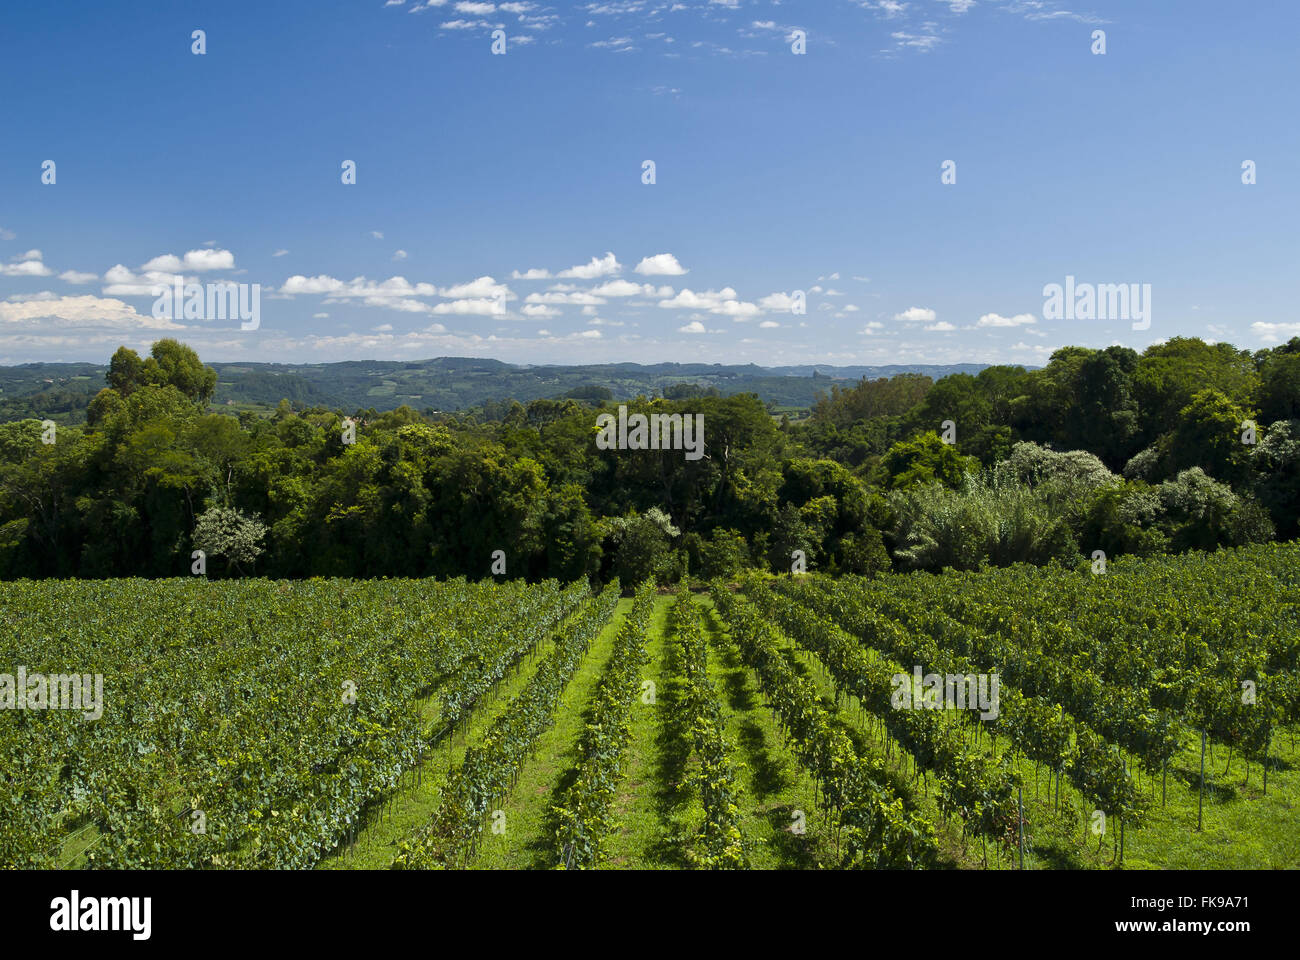 Plantation of grape Pinot Noir winery for industry Stock Photo